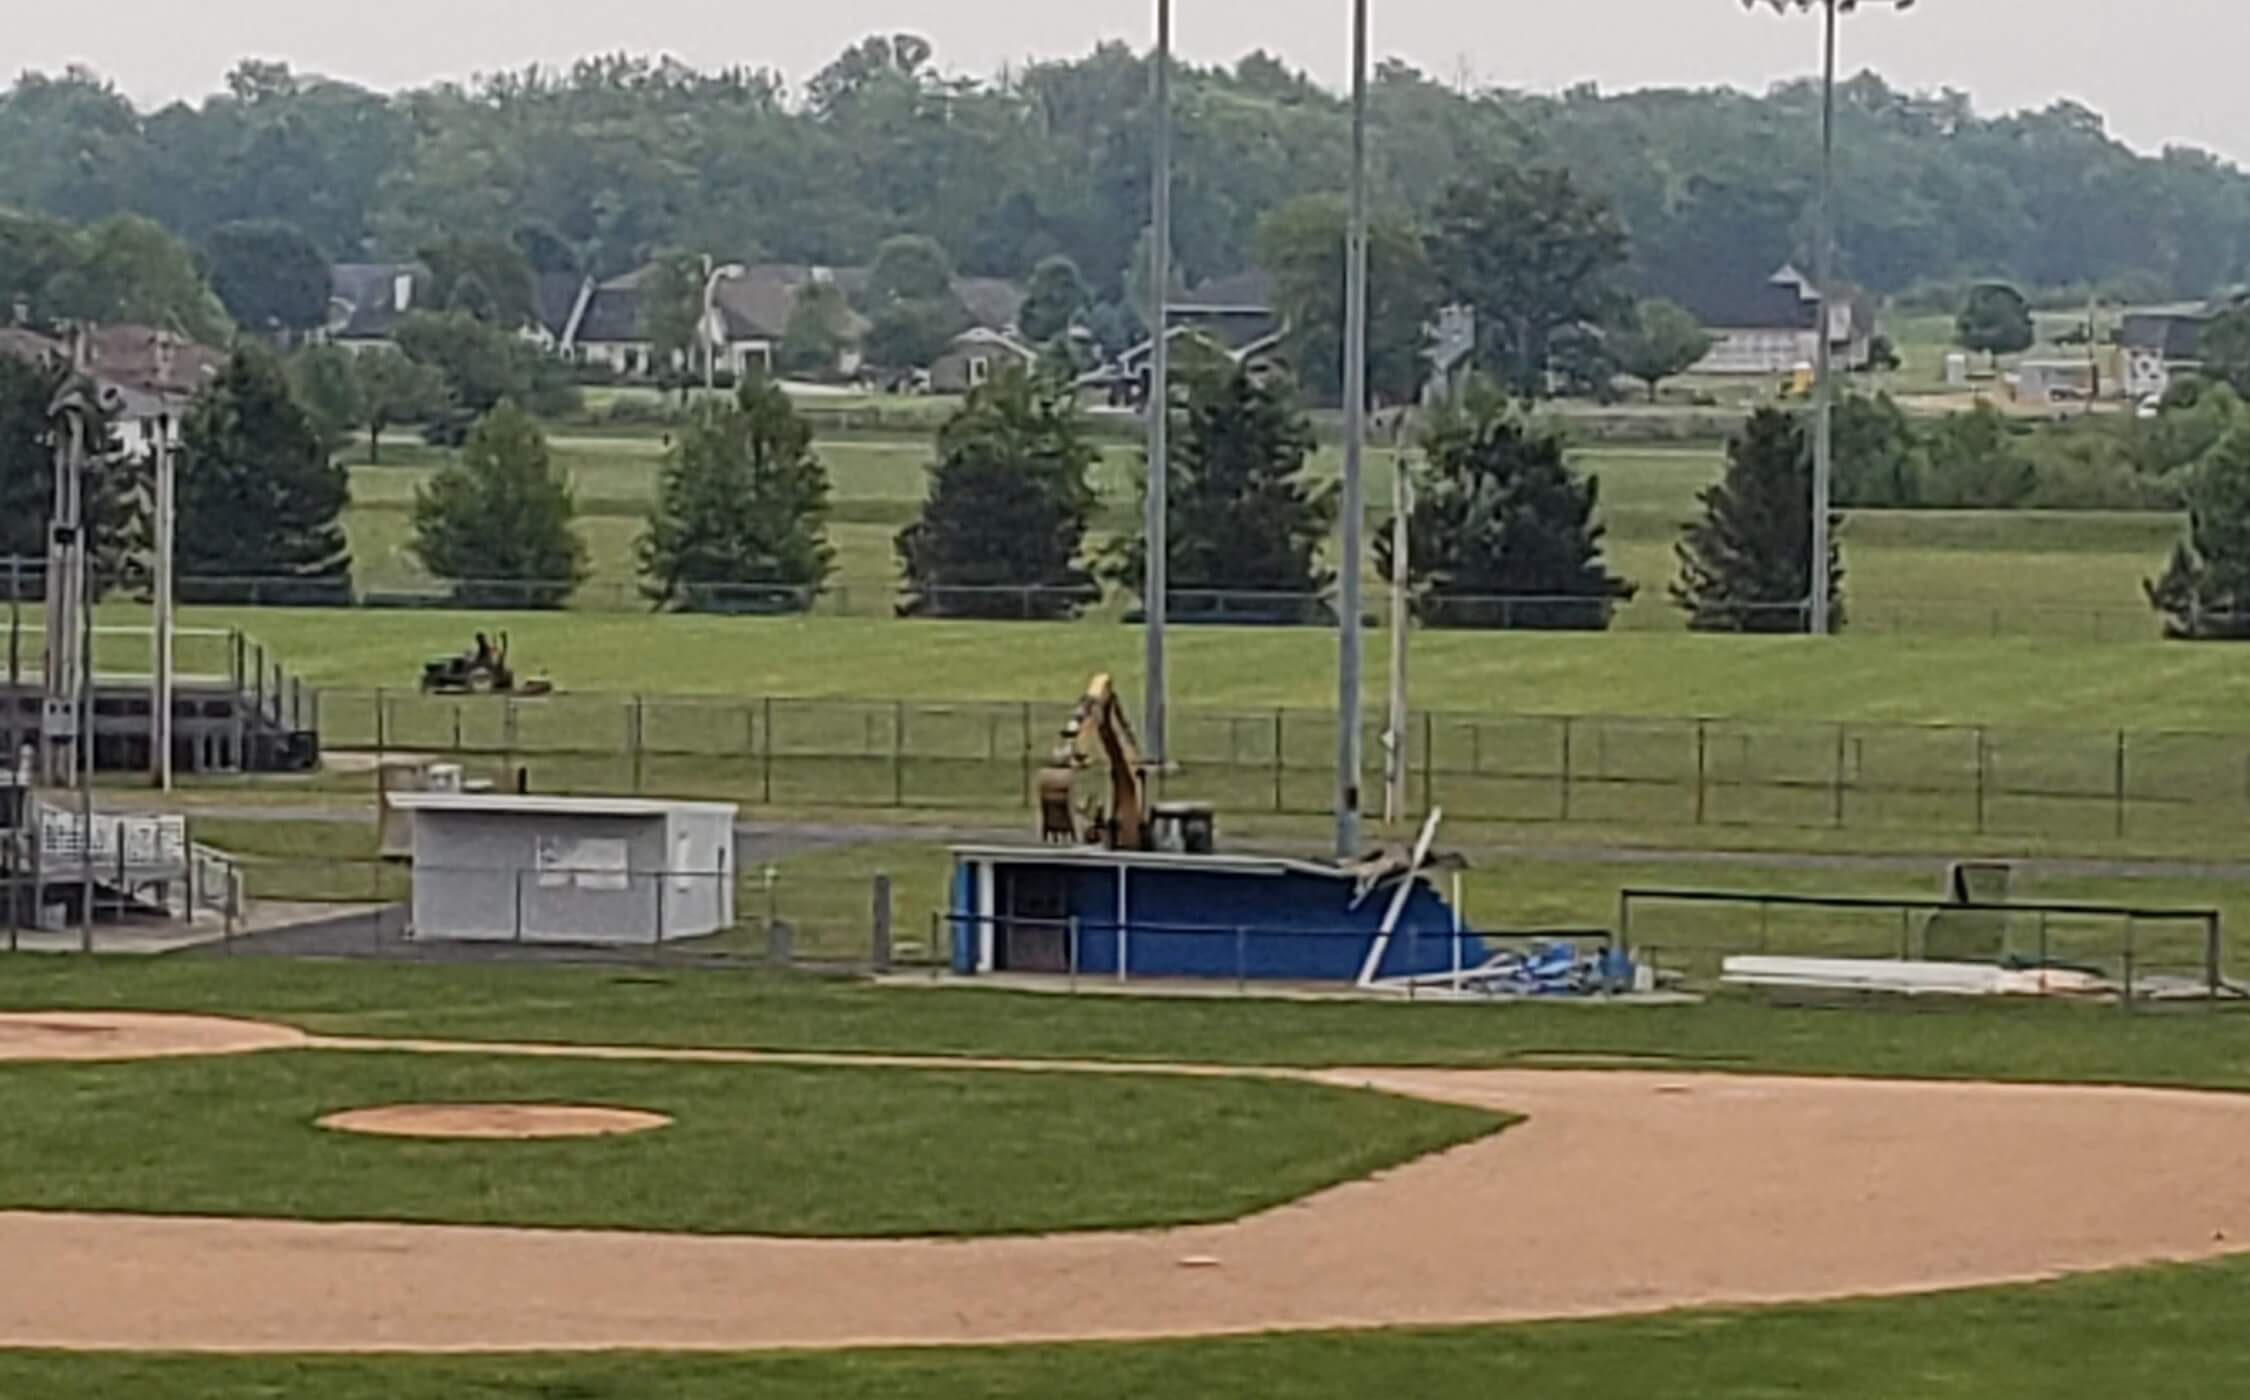 An excavator tears into the roof of the old blue dugout.